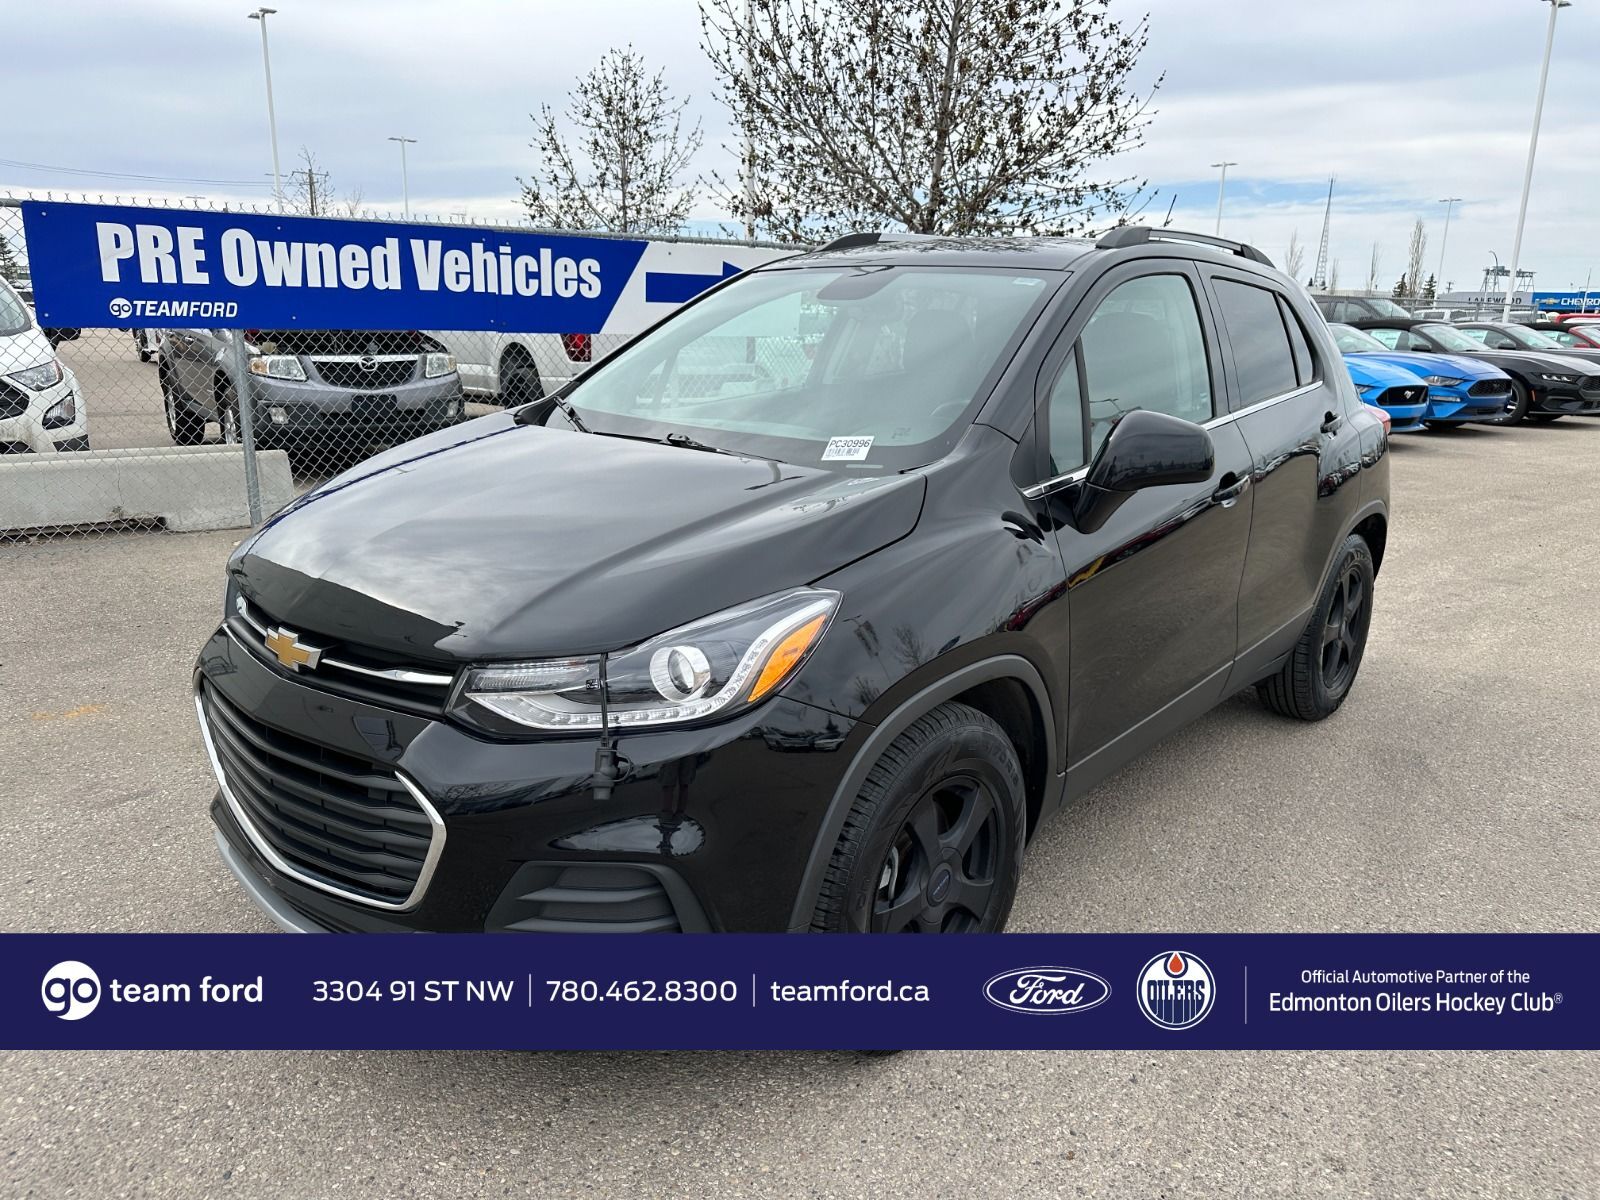 2017 Chevrolet Trax LT - AWD, CLOTH, BLUETOOTH, HEATED SEATS, A/C AND 